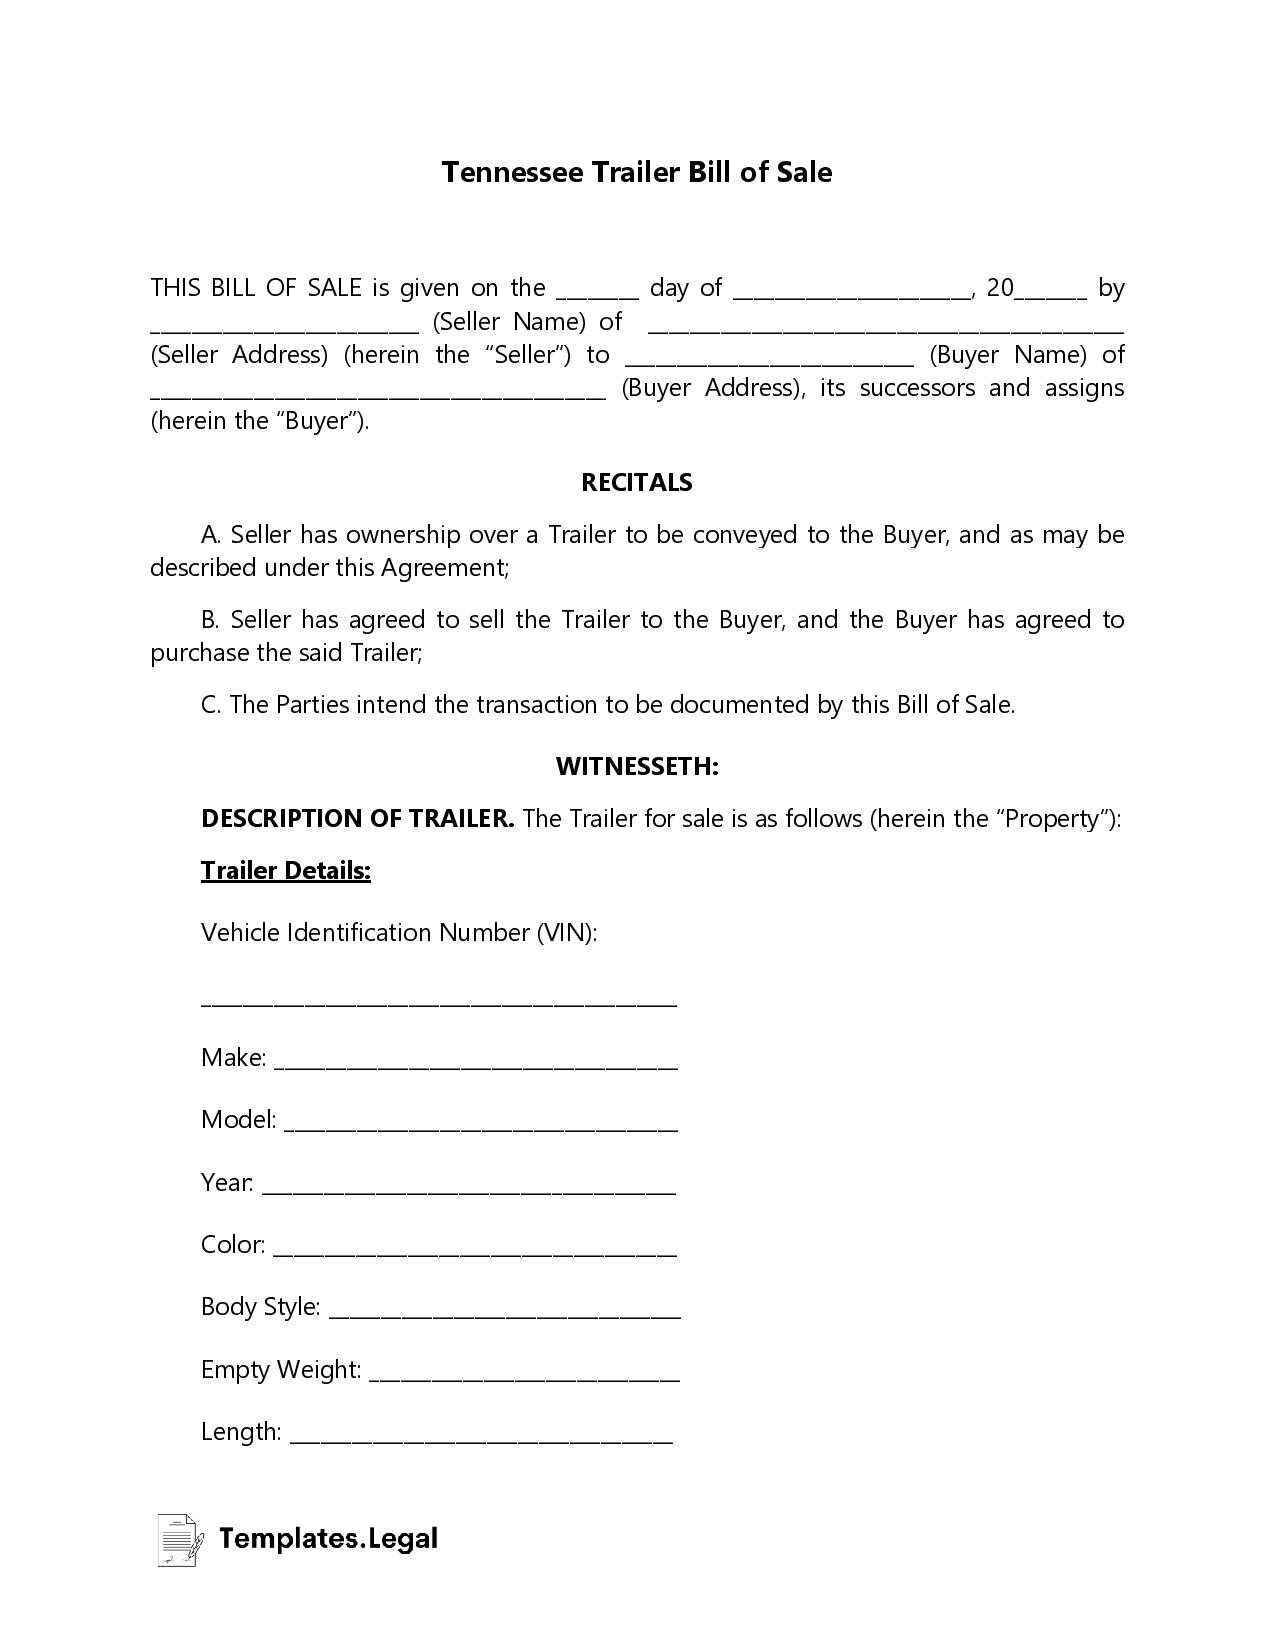 Tennessee Trailer Bill of Sale - Templates.Legal